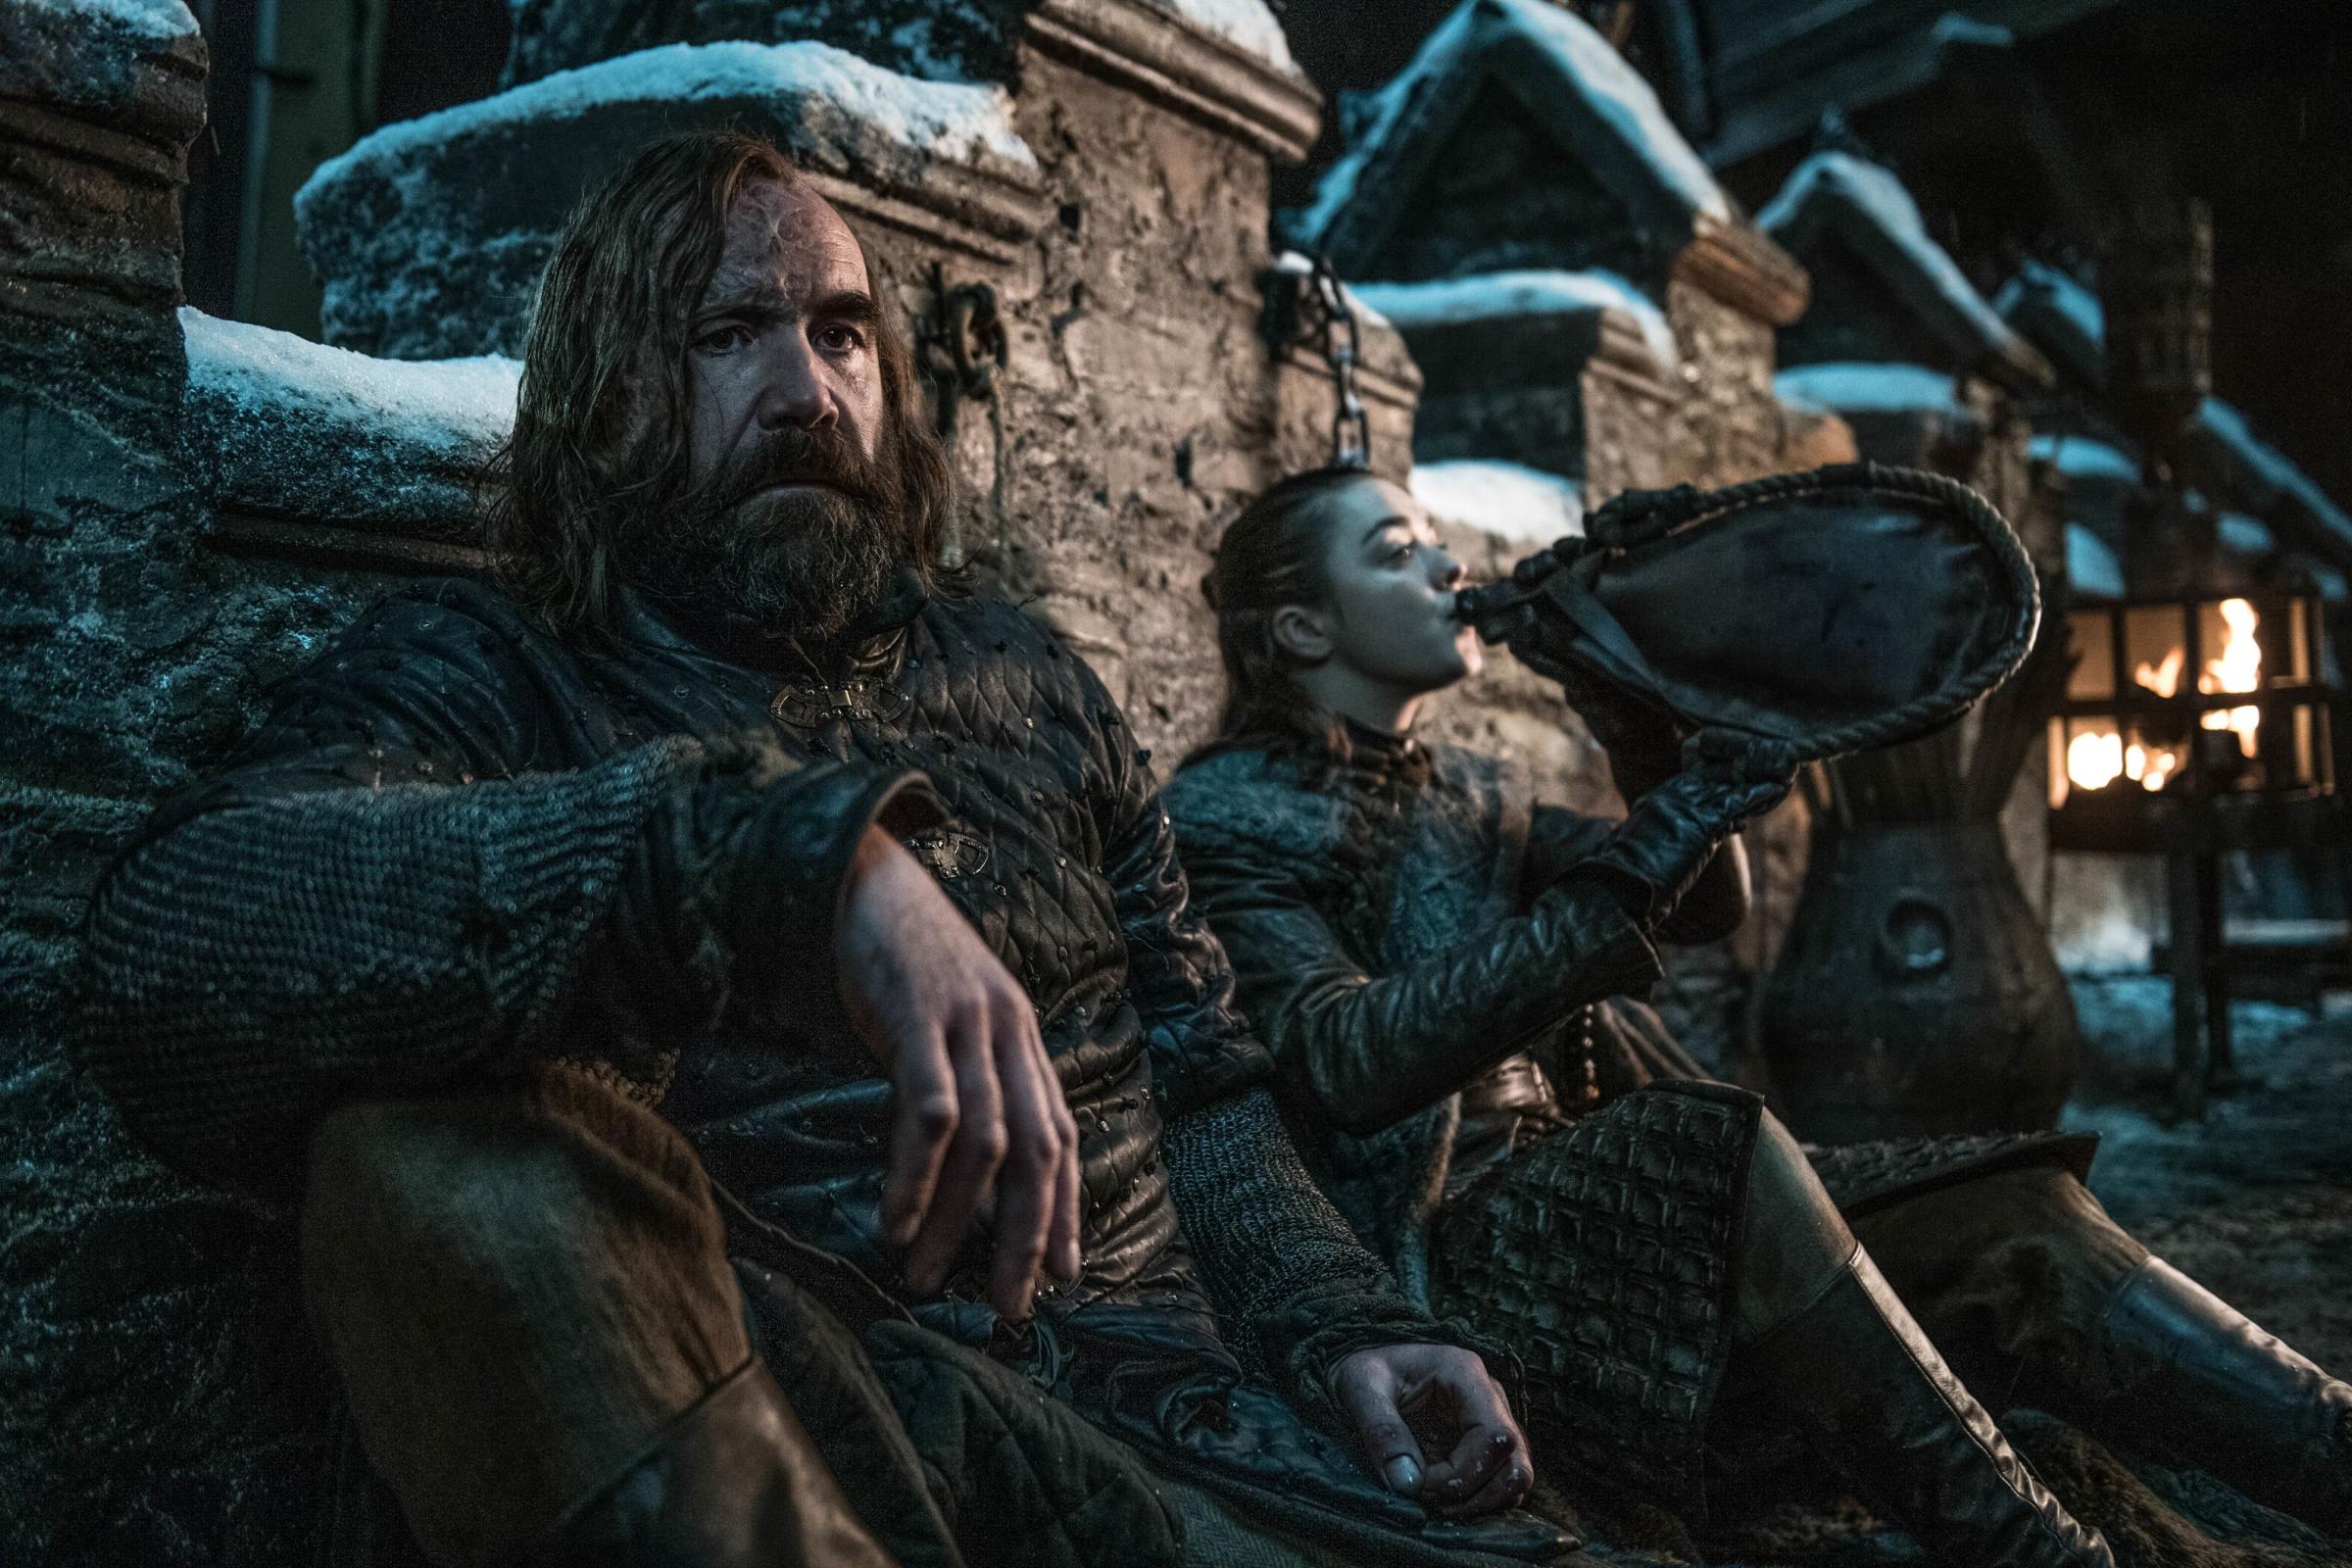 Arya and the Hound meet again in Game of Thrones season 8 episode 2